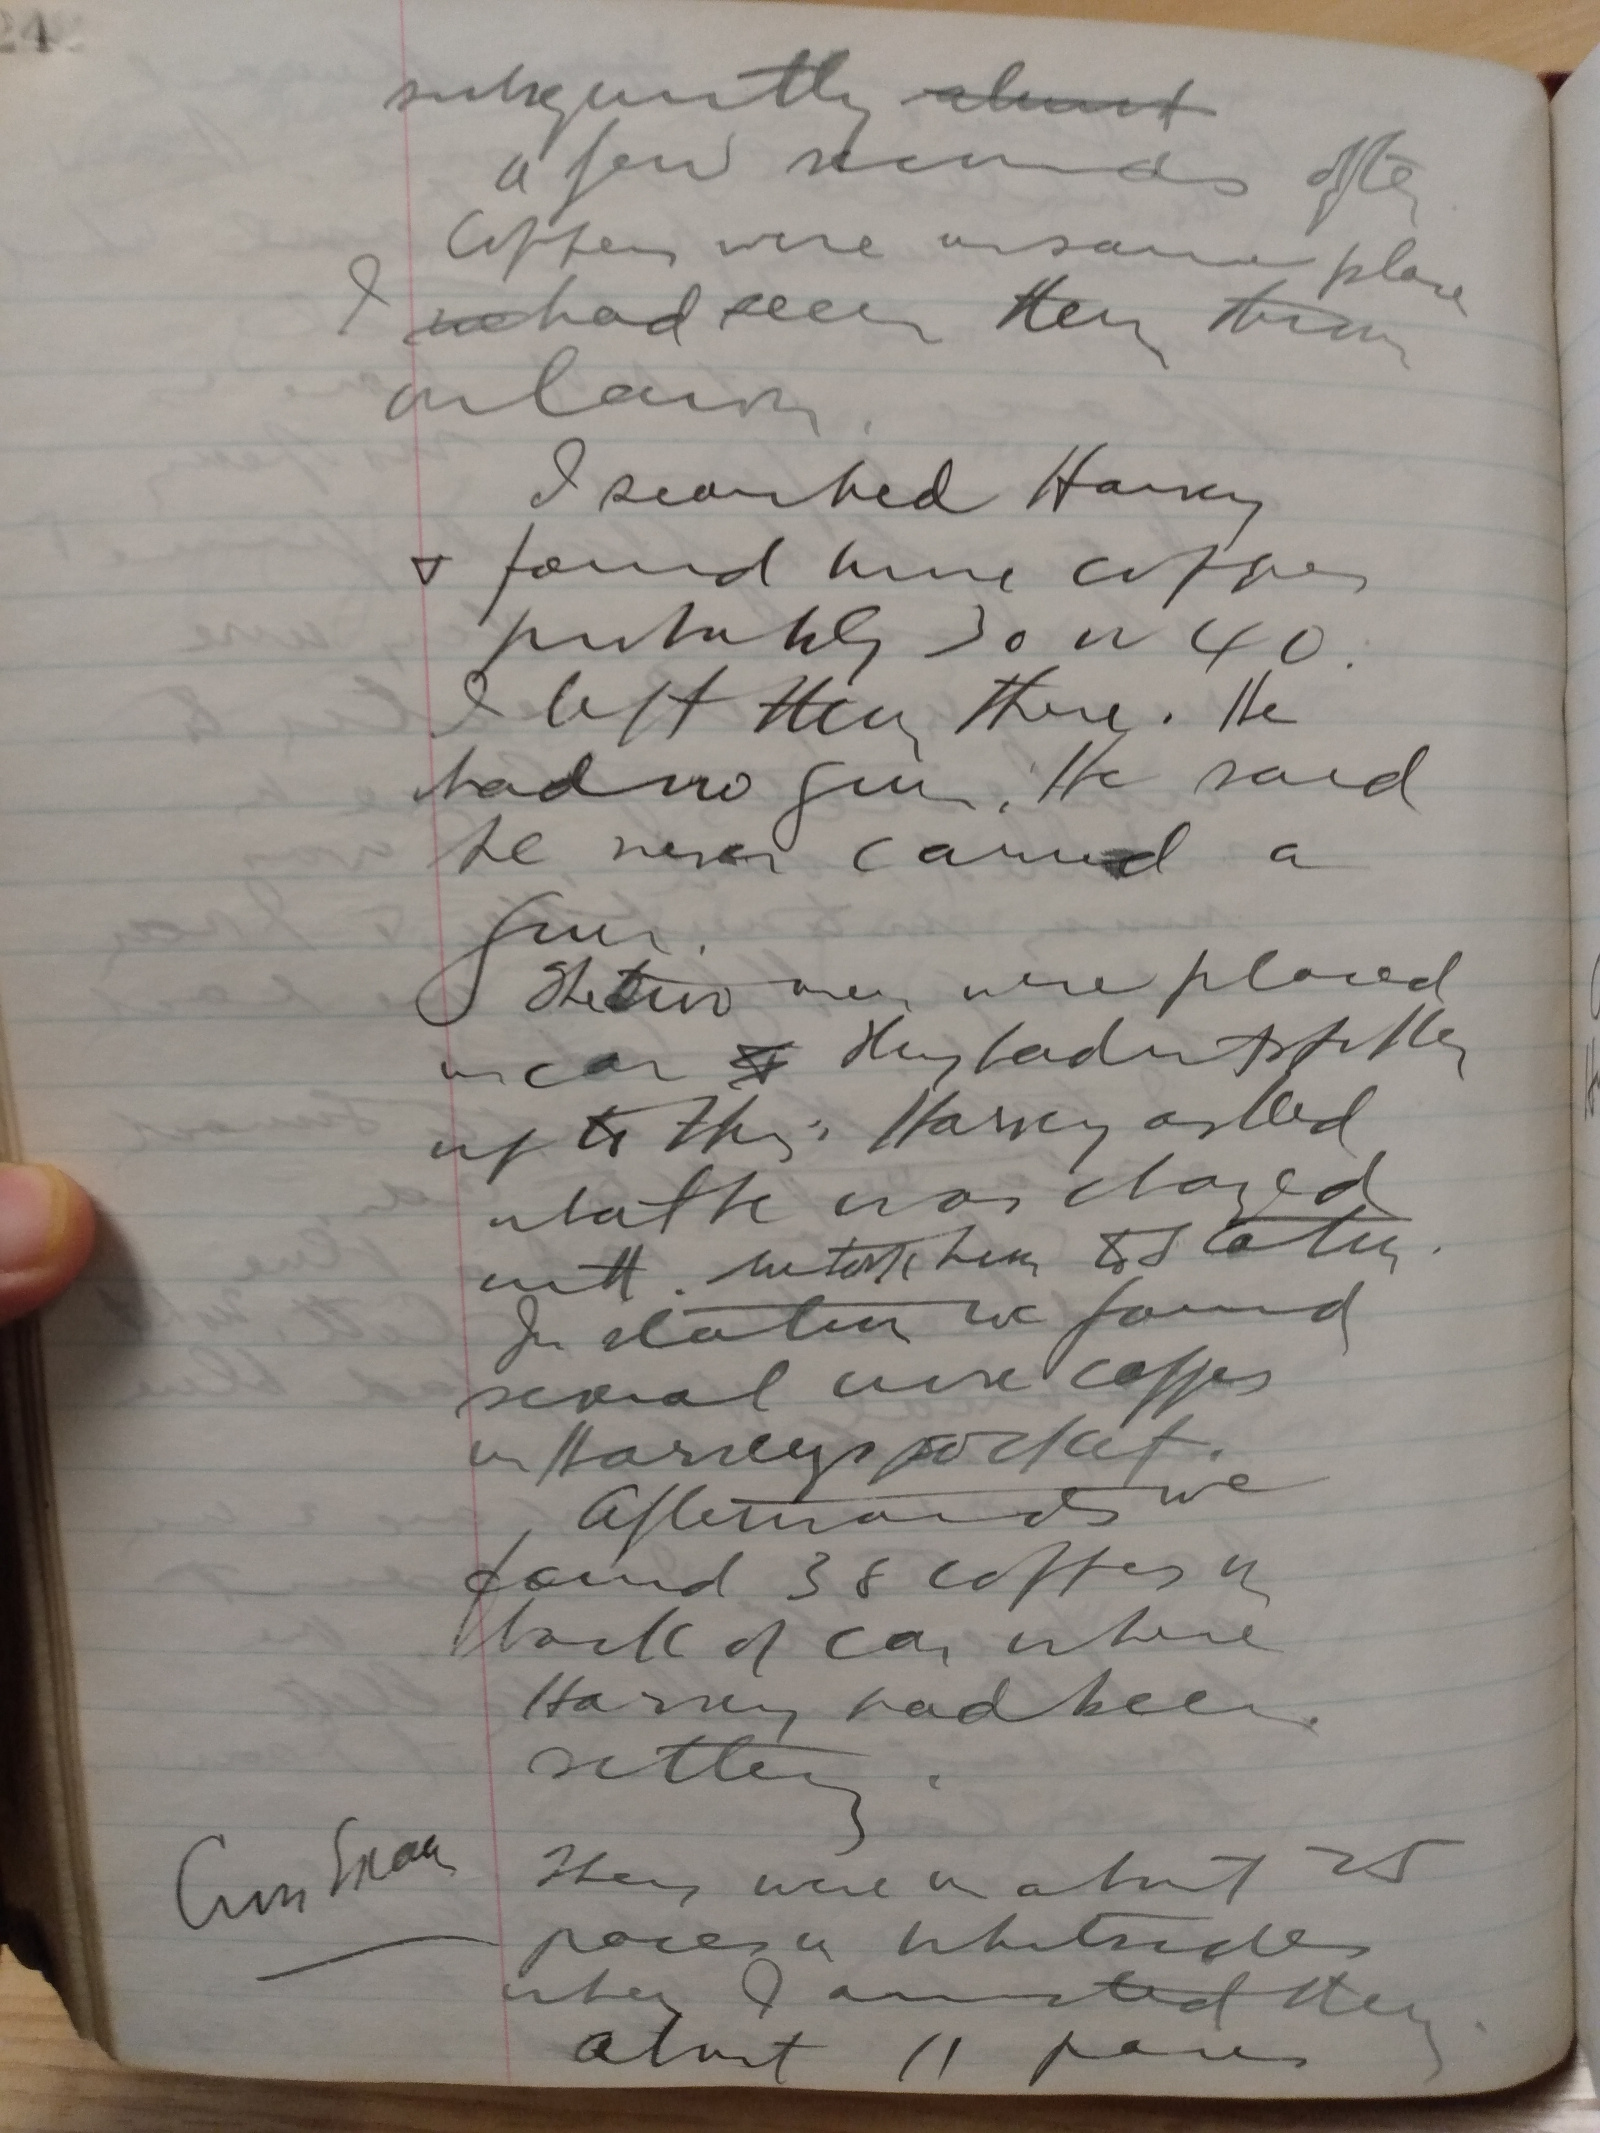 Page 8 of Judge Denton's bench book notes